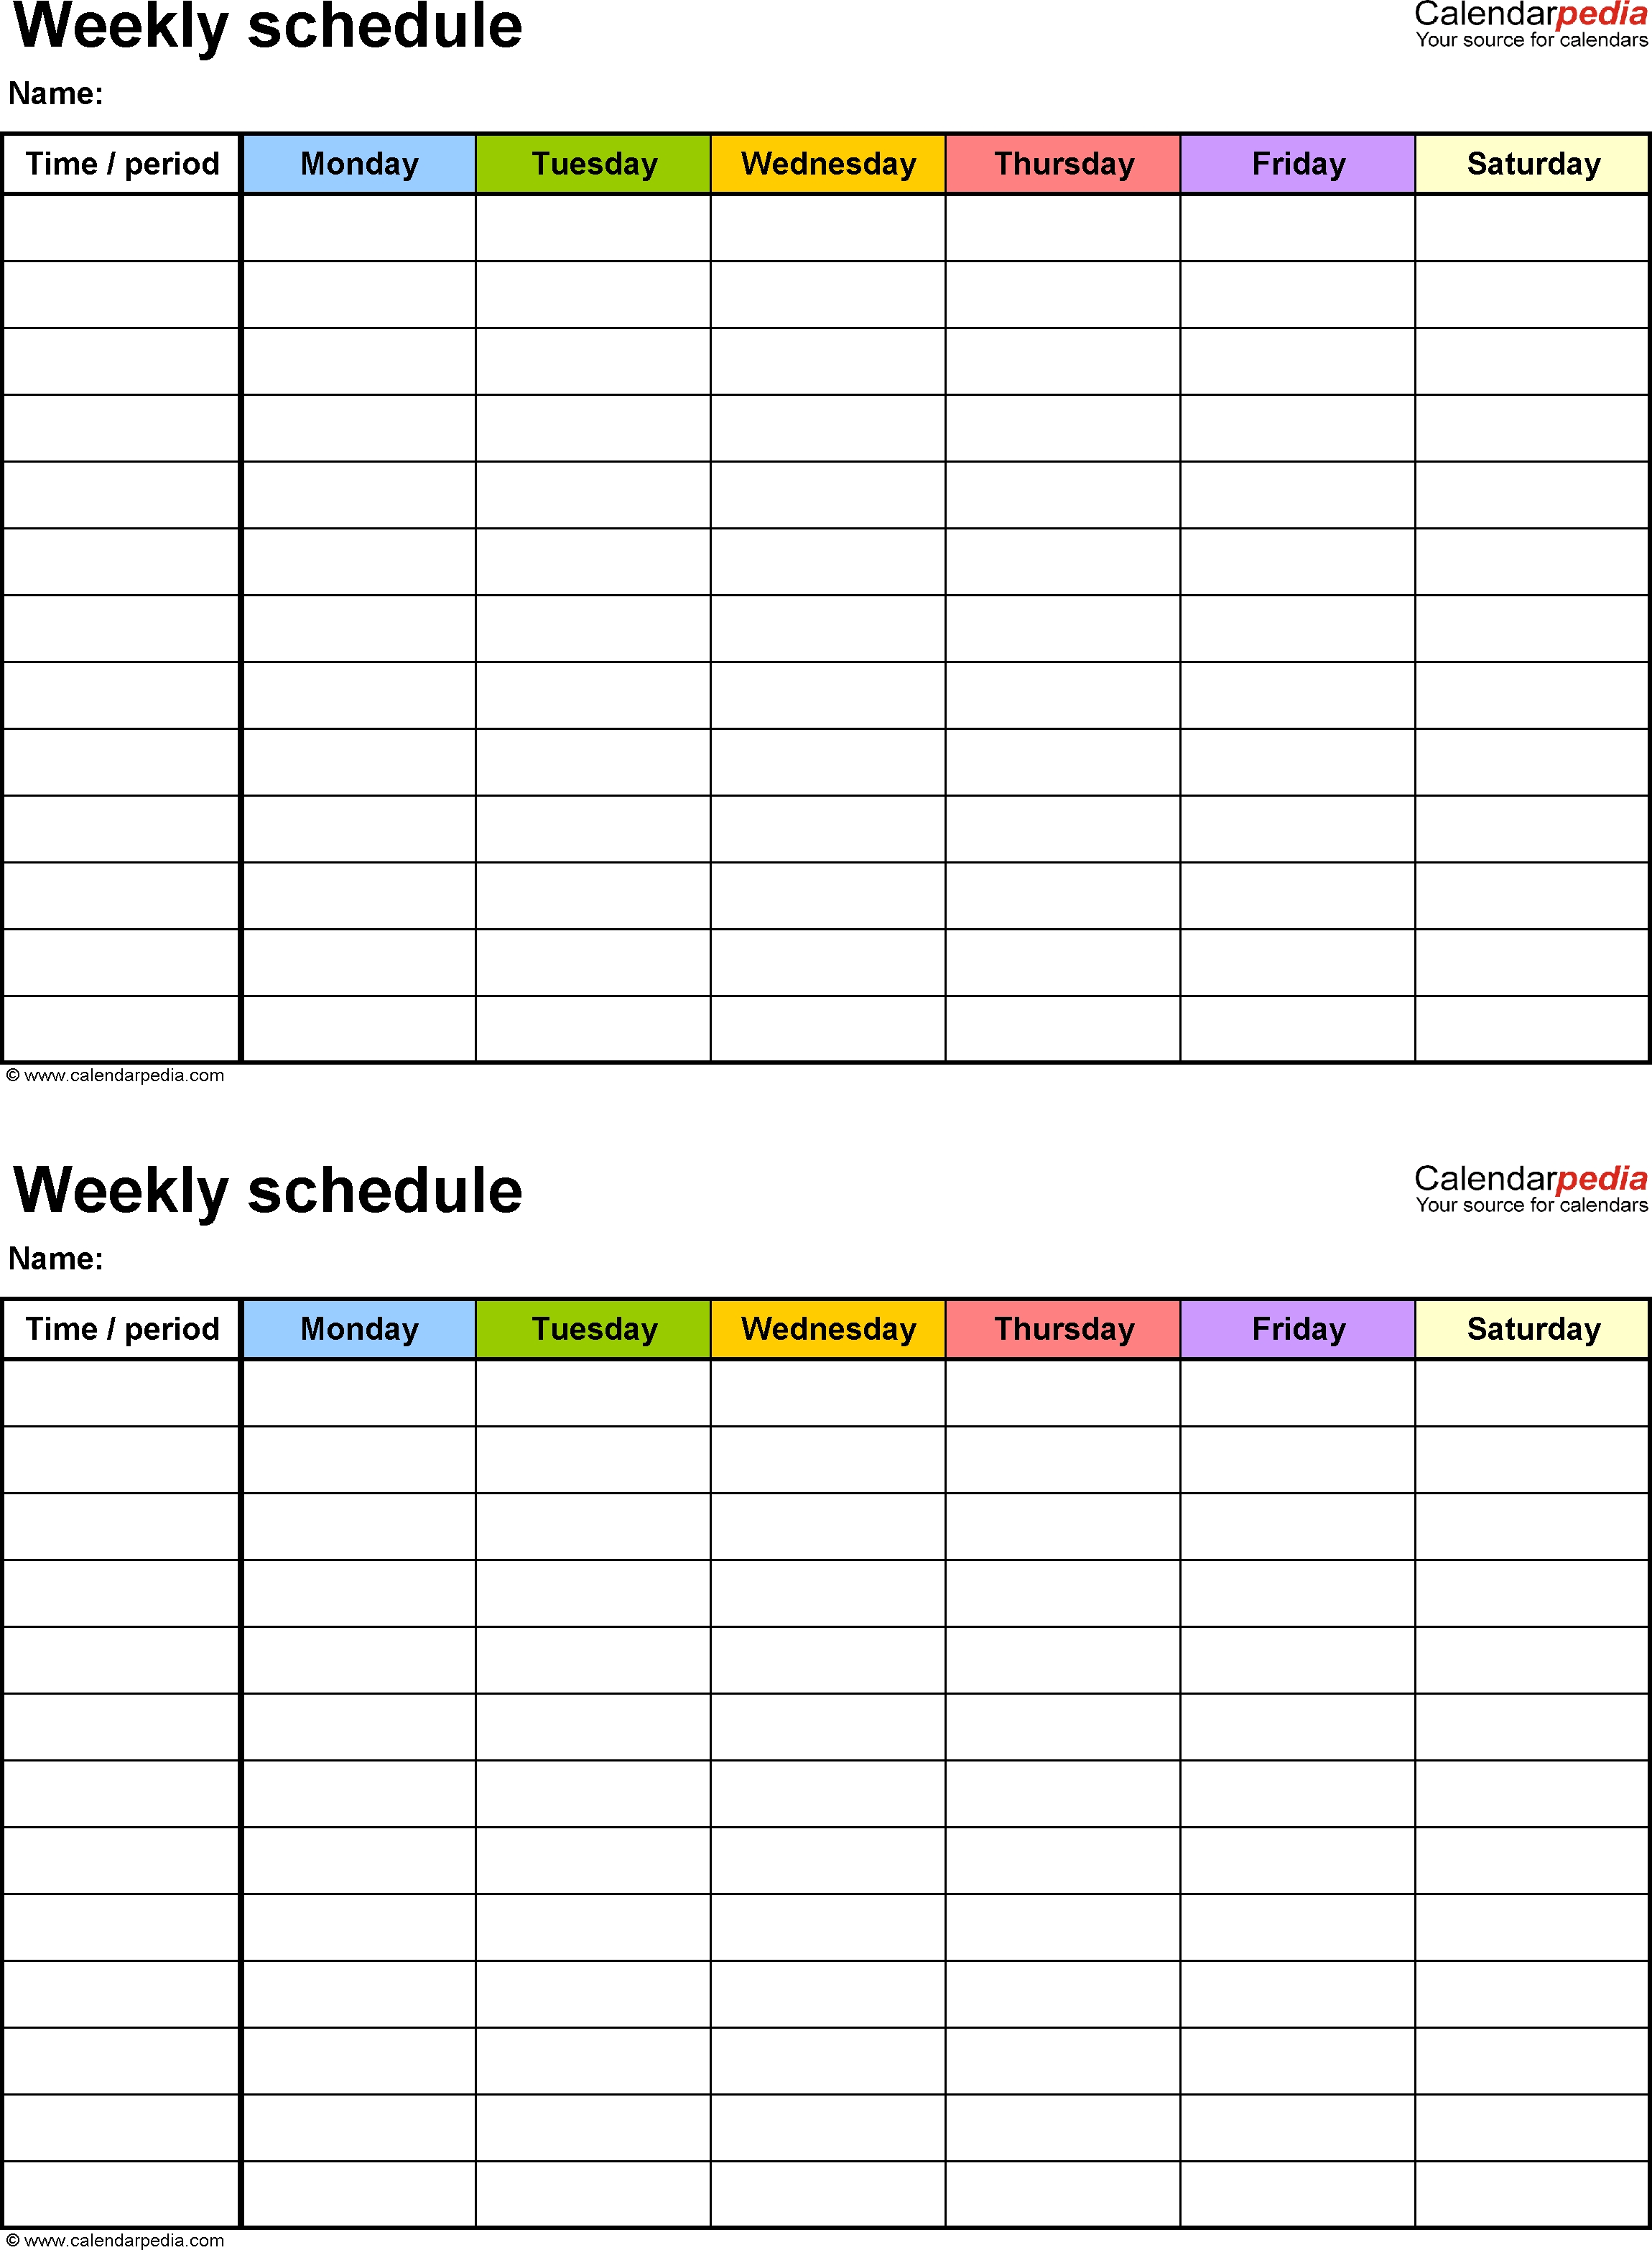 Free Weekly Schedule Templates For Word - 18 Templates in Template For Monday Through Friday School Schedule